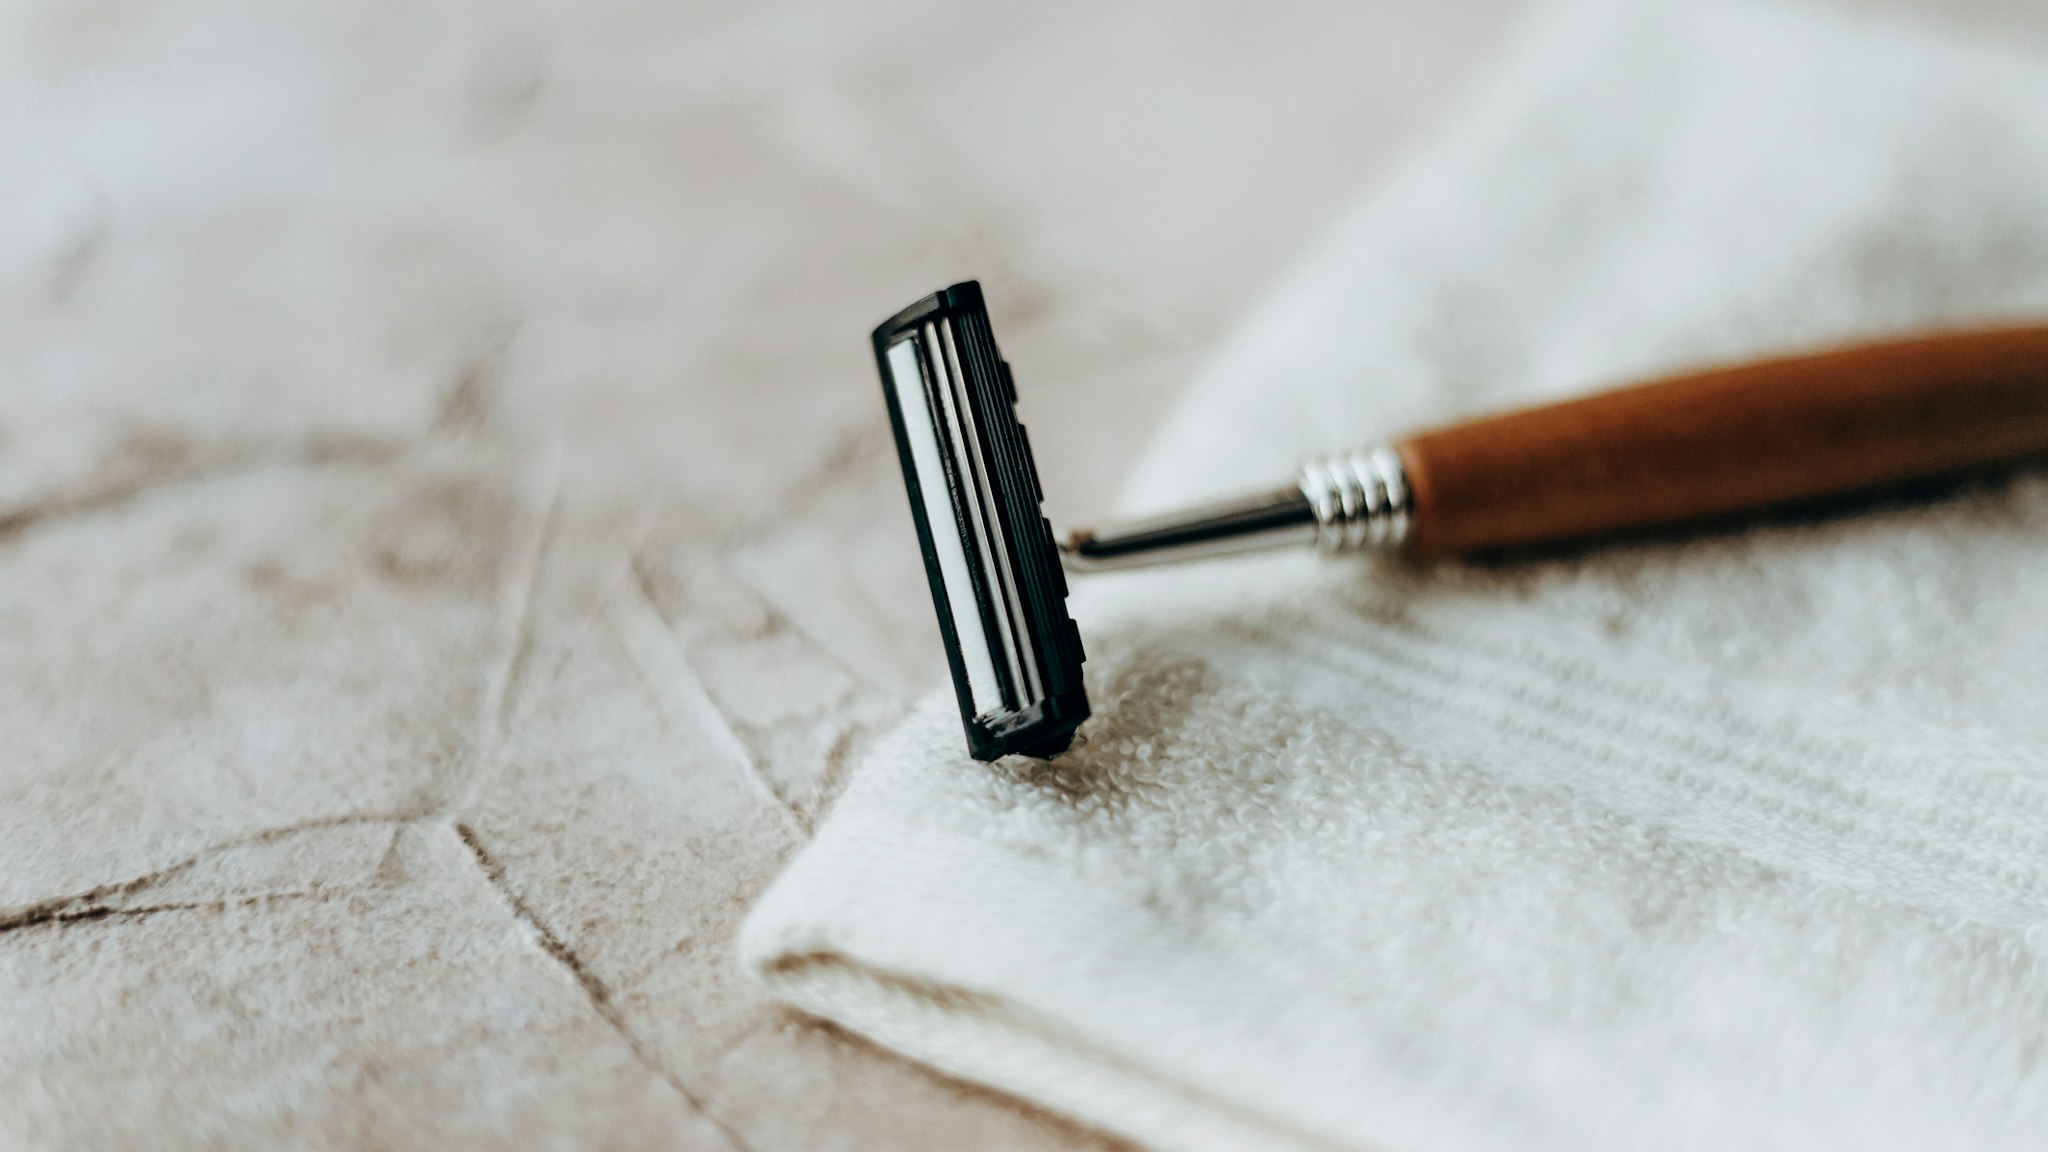 Eco razor with a wooden handle lies on a white towel on a beige background